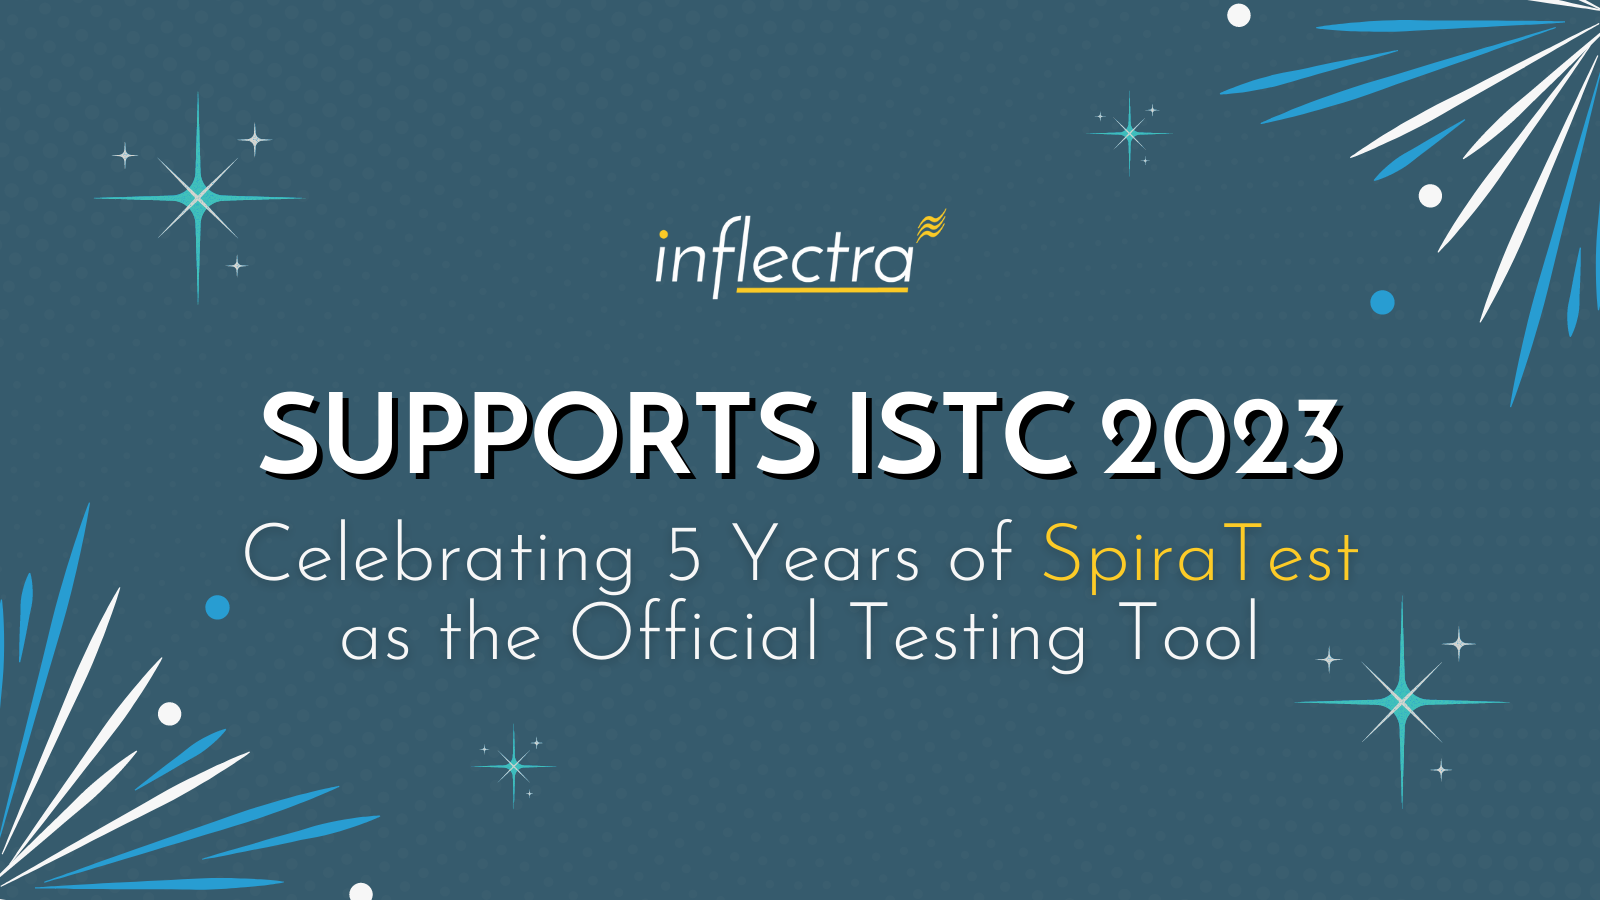 inflectra-supports-istc-celebrating-five-years-of-spiratest-as-the-official-testing-tool-image